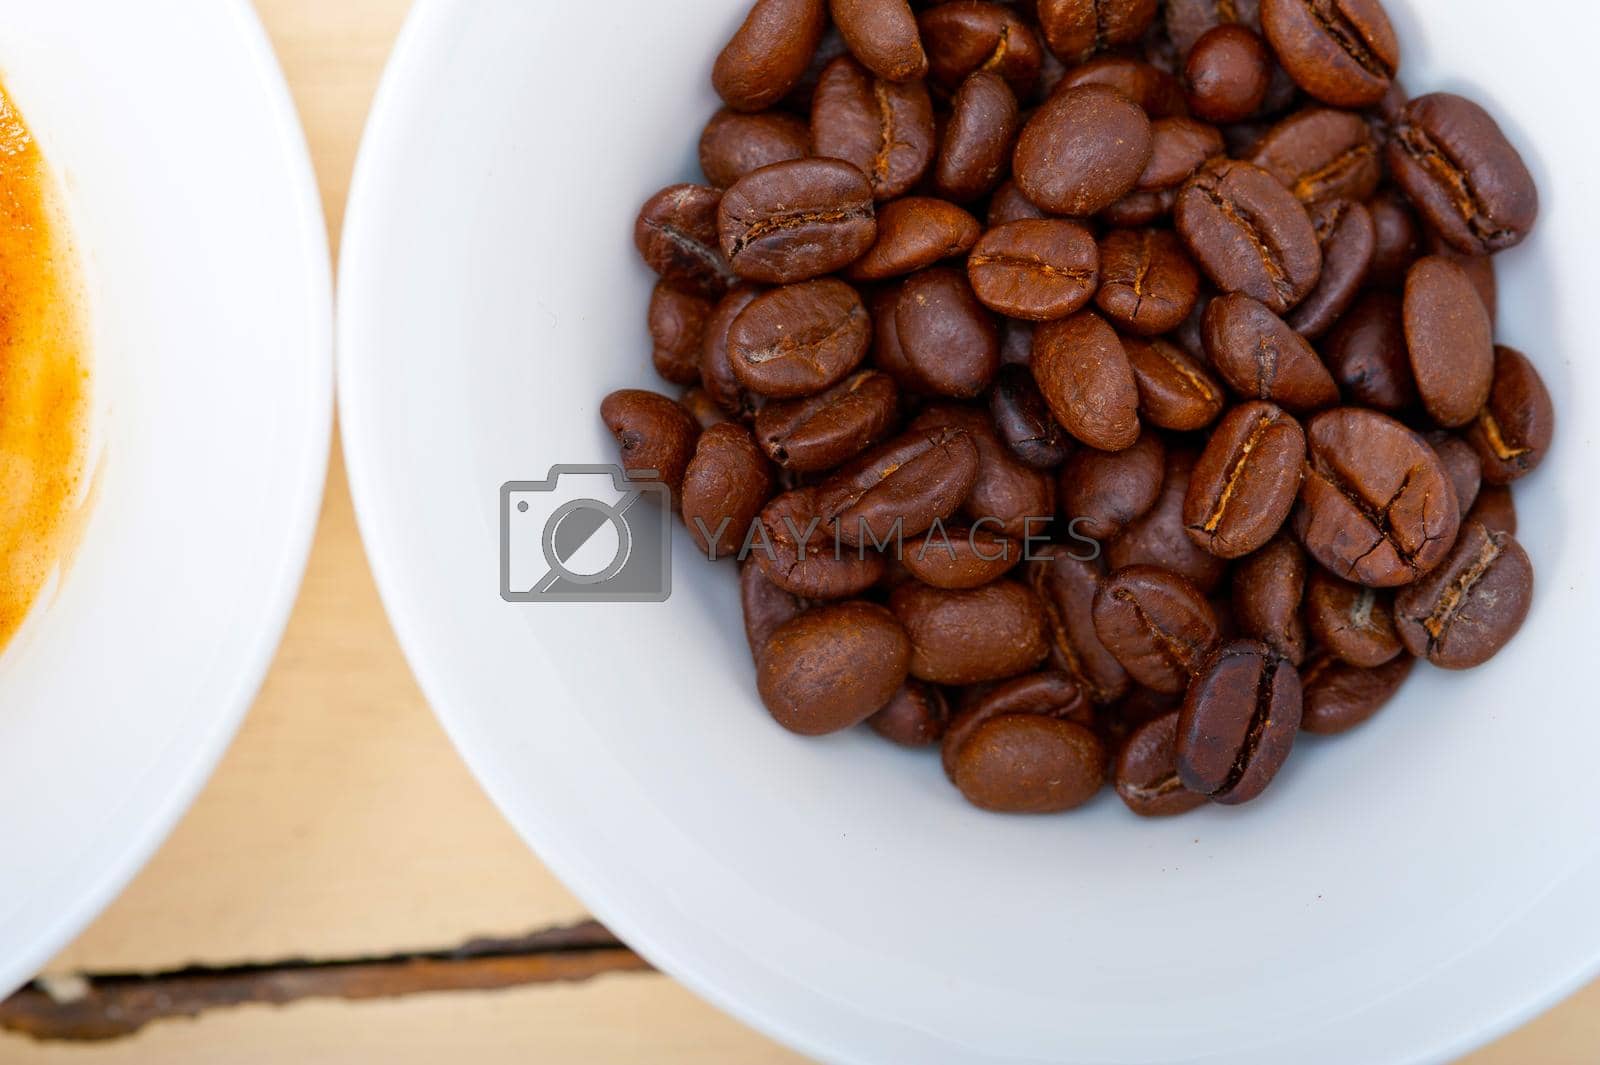 Royalty free image of espresso cofee and beans by keko64